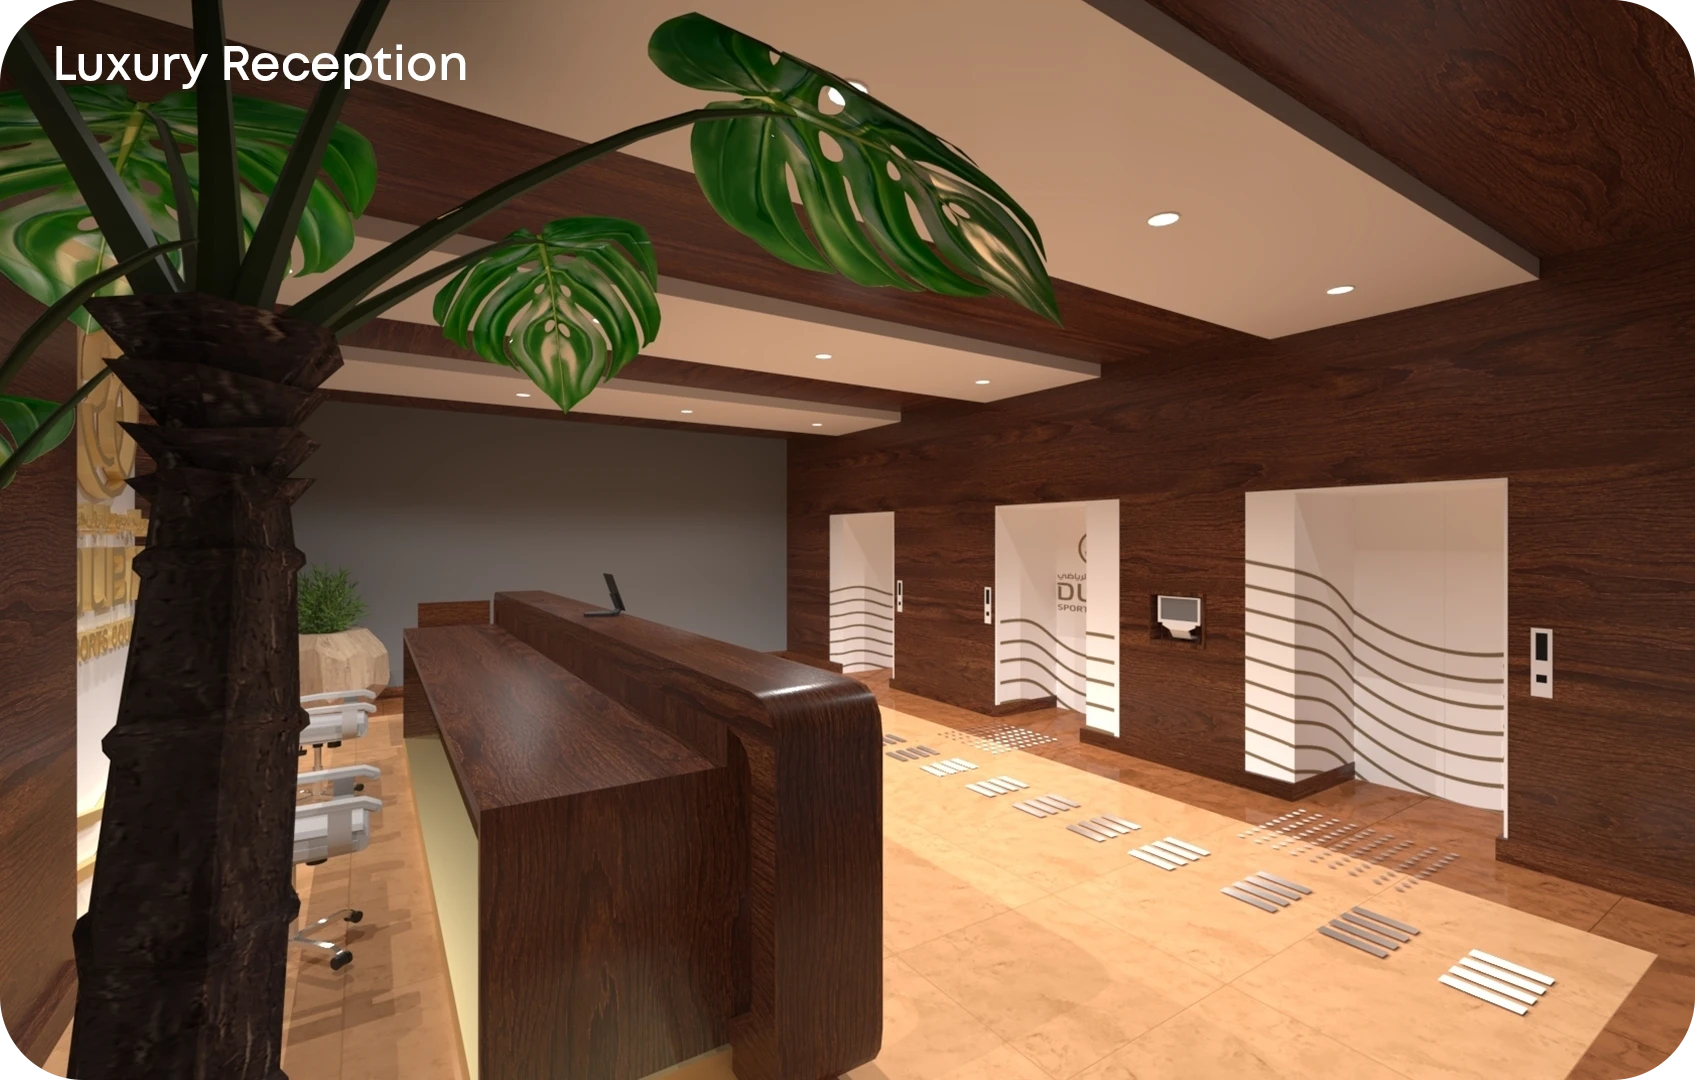 3799-luxury-reception-1.png